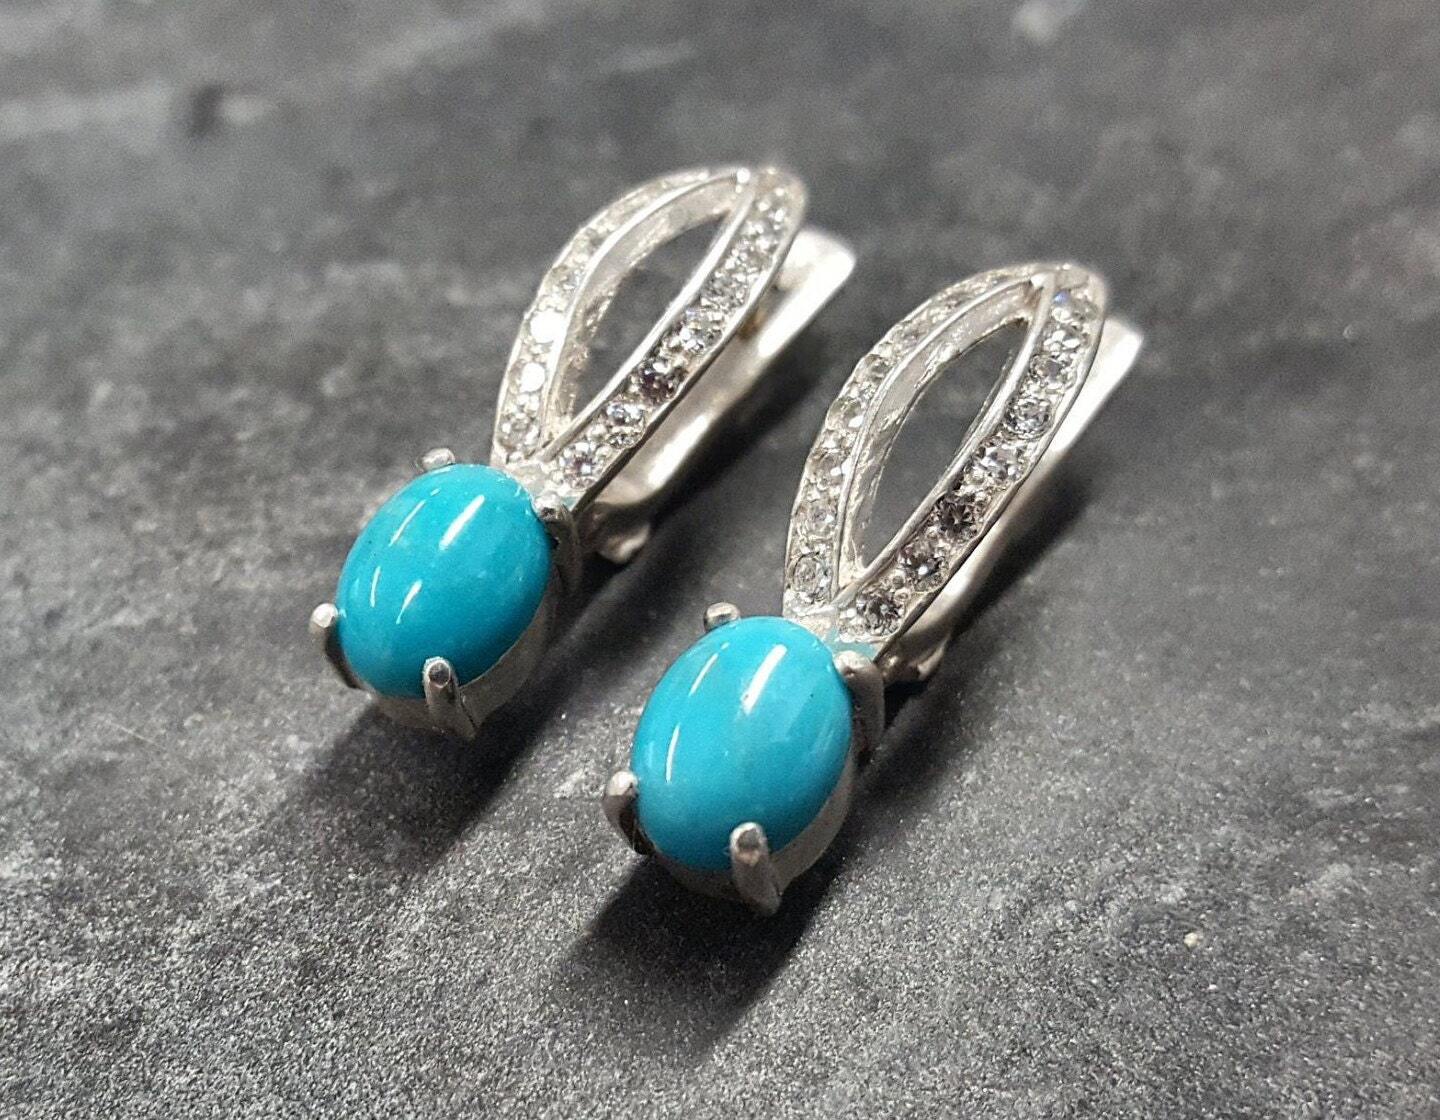 Turquoise Earrings, Natural Turquoise, Vintage Turquoise, Arizona Turquoise, Vintage Turquoise Earrings, Antique Earrings, Pure Silver